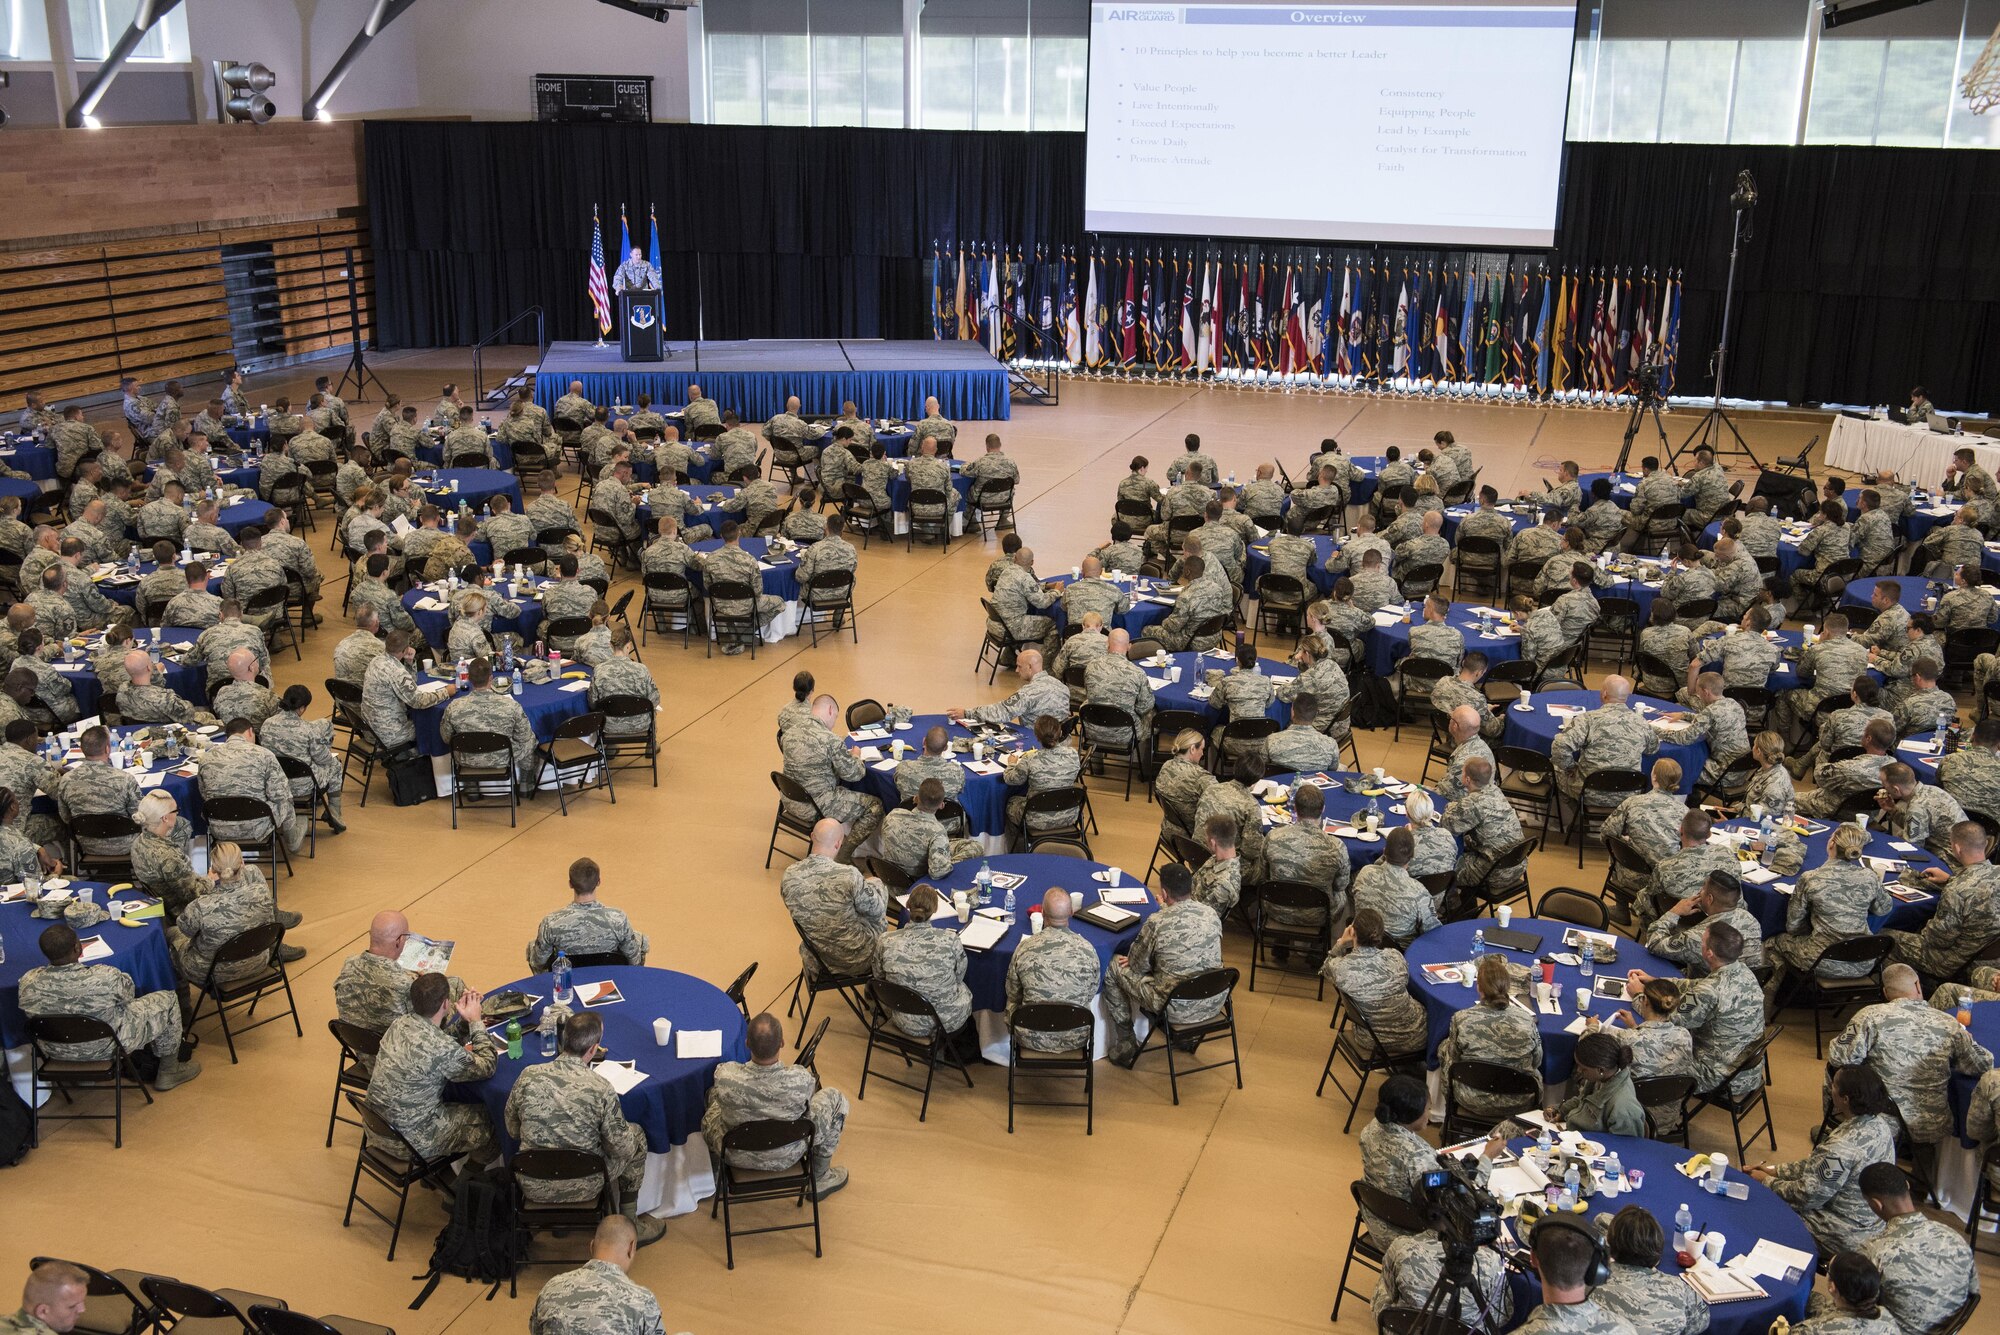 Nearly 350 Airmen representing Air National Guard units from each state, territory and the District of Columbia, attended the Enlisted Leadership Symposium, hosted by the Command Chief of the Air National Guard, Chief Master Ronald C. Anderson, held at Camp Dawson, W.Va., Aug.15-17. The three-day event focused on leadership and professional development. Airmen, non-commissioned officers and senior non-commissioned officers were hand-selected by their units to attend the event. (U.S. Air National Guard photo/Senior Master Sgt. Emily Beightol-Deyerle)